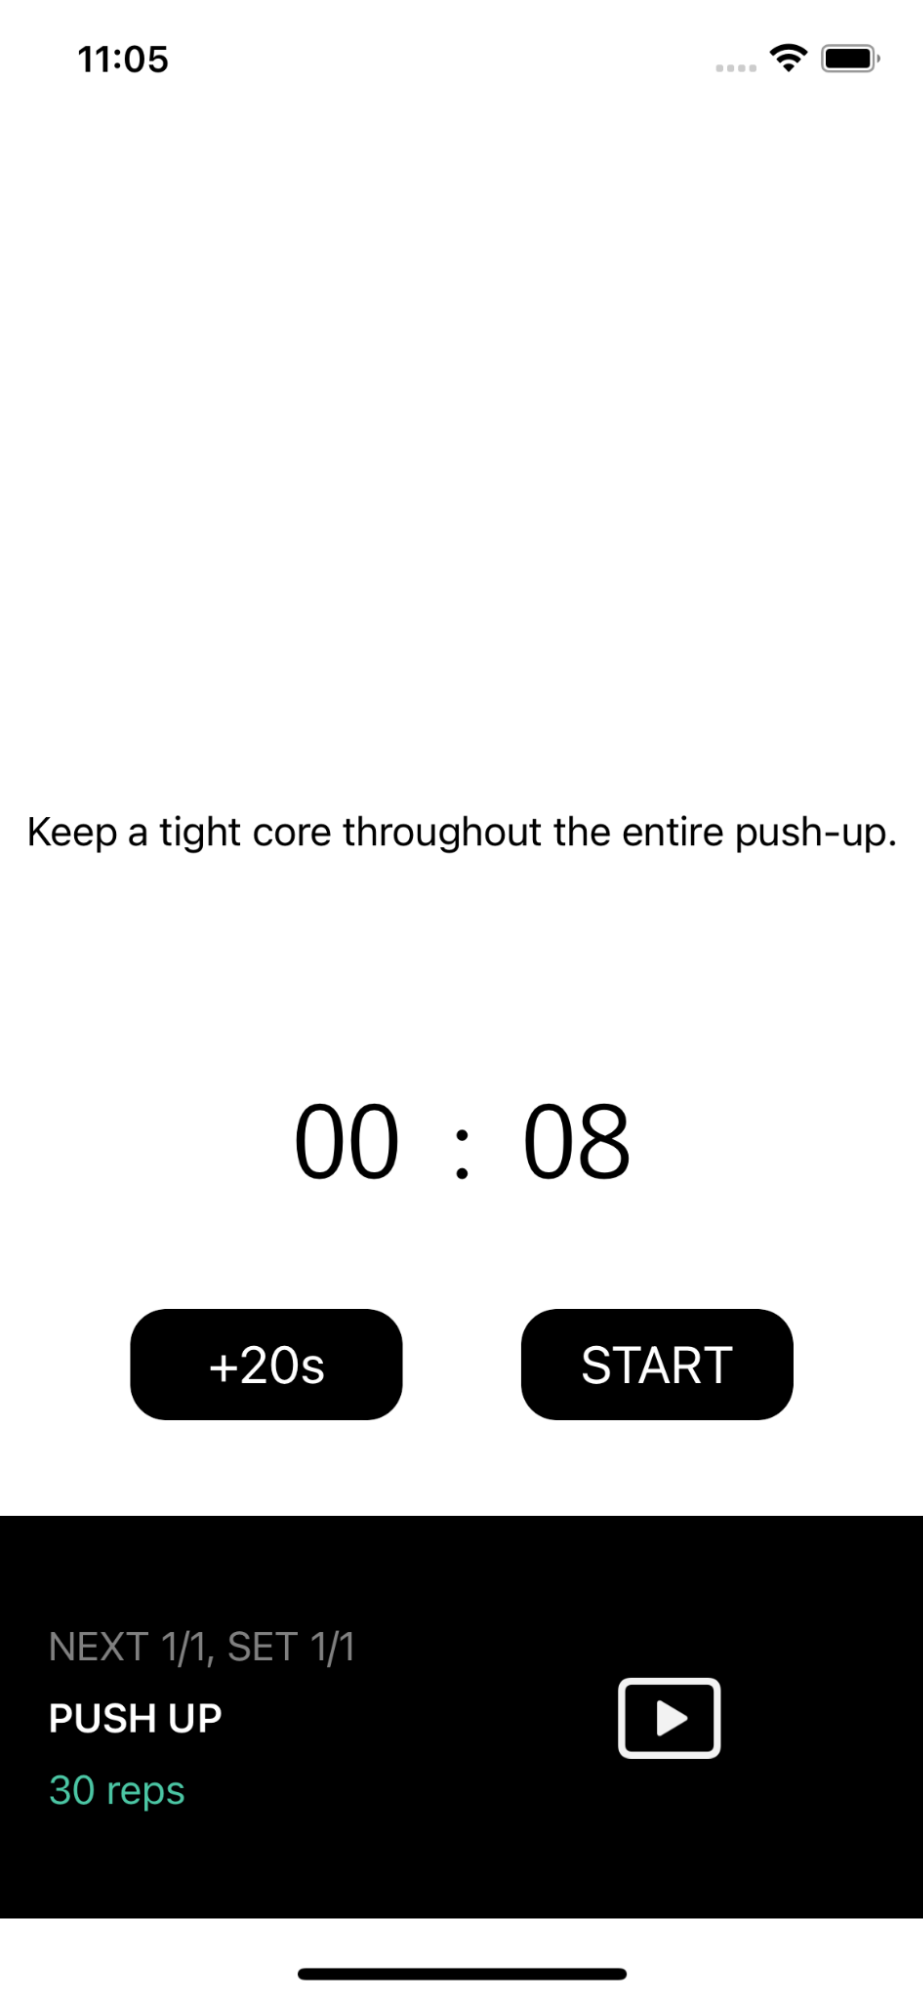 how your custom exercise tips will show up in the workout rest screen